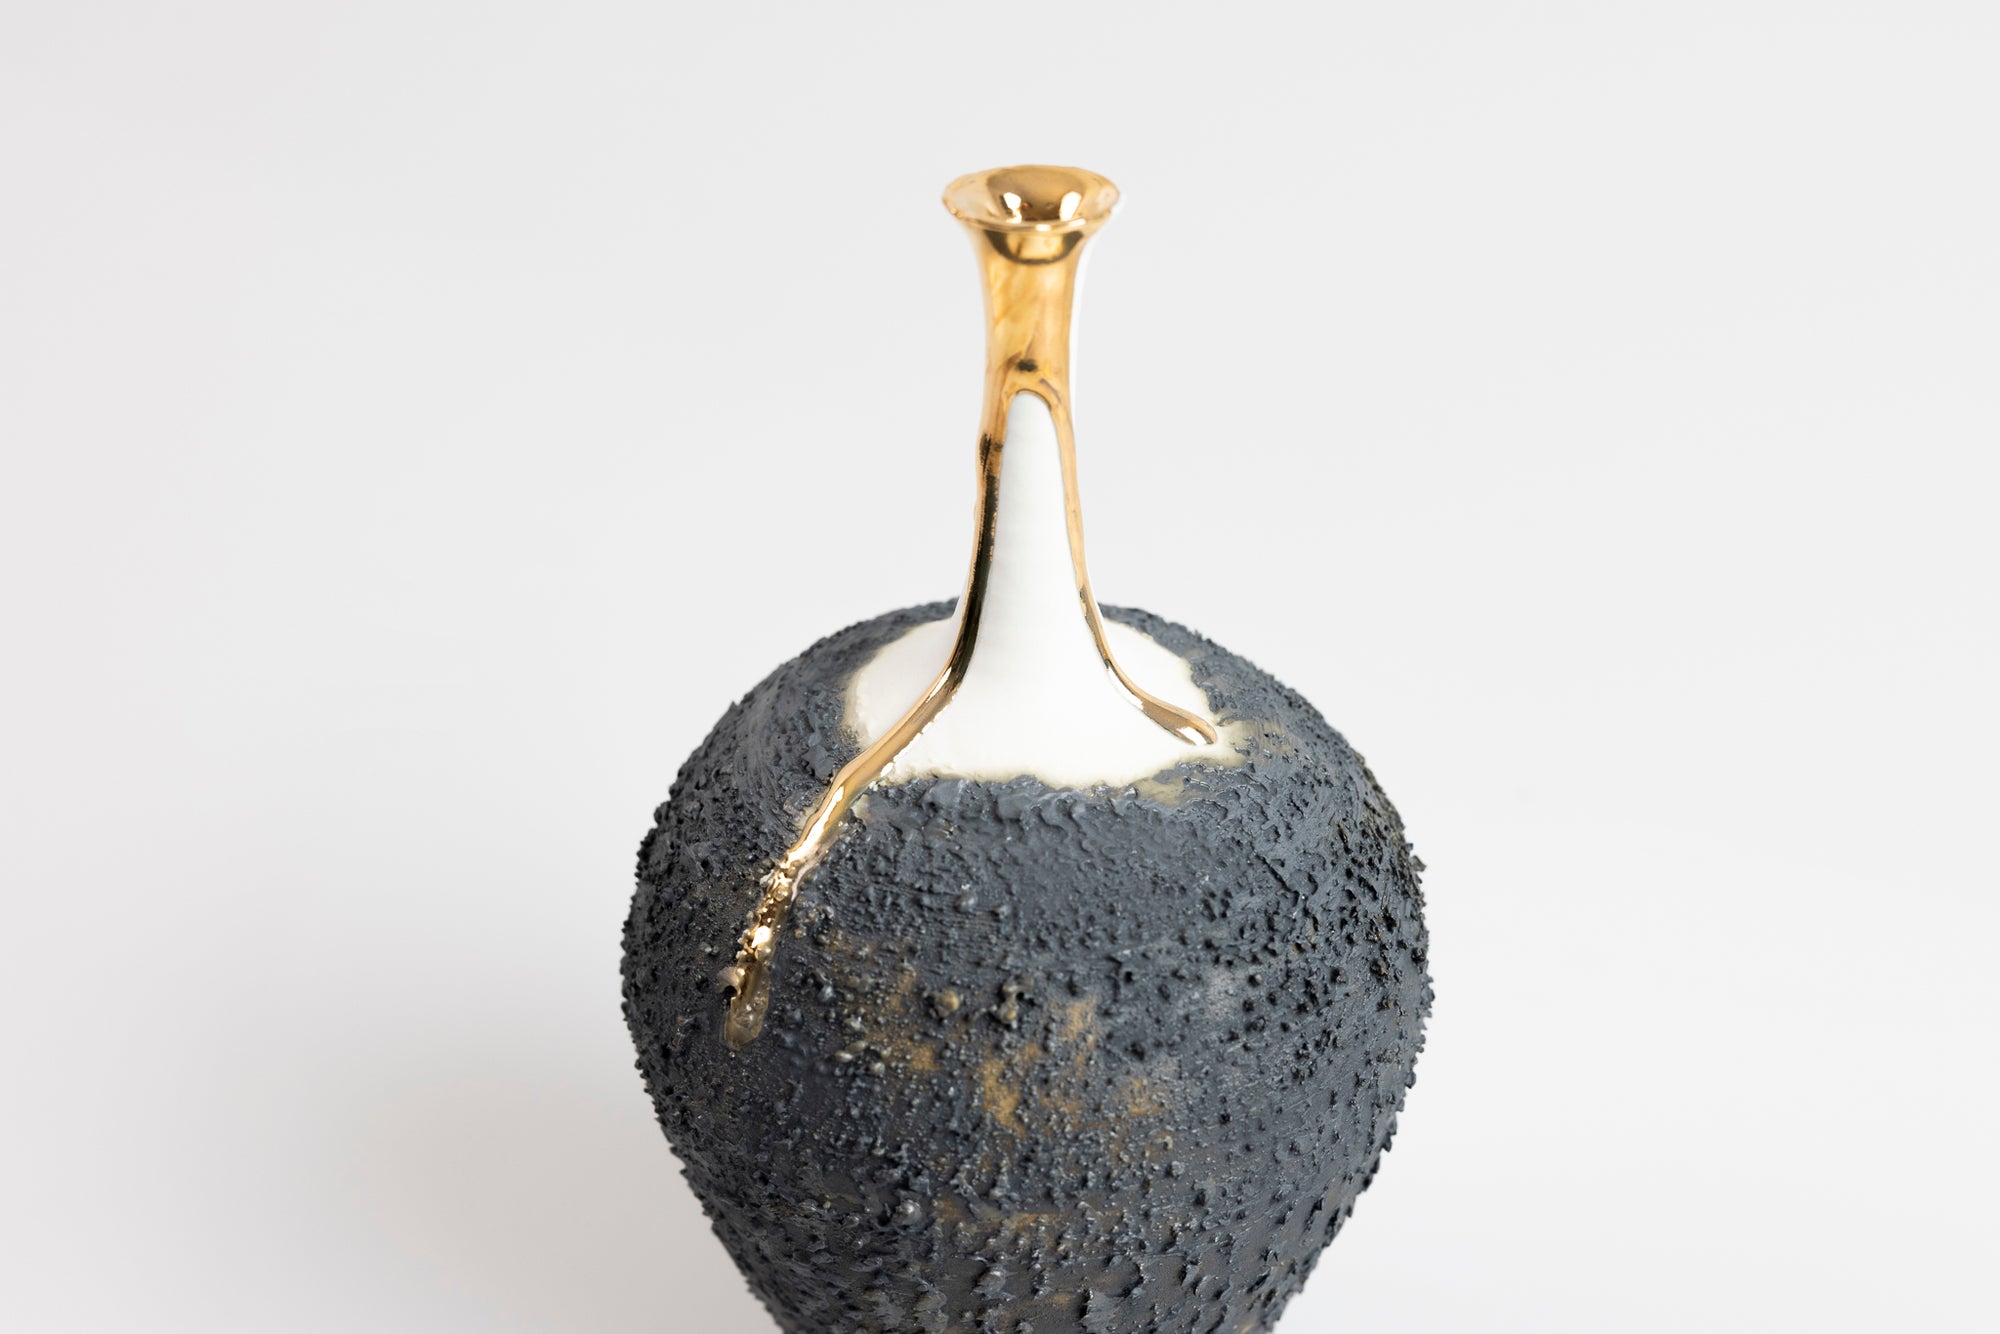 Textured long necked vase with gold lustre, by Alex McCarthy, available at Padstow Gallery, Cornwall